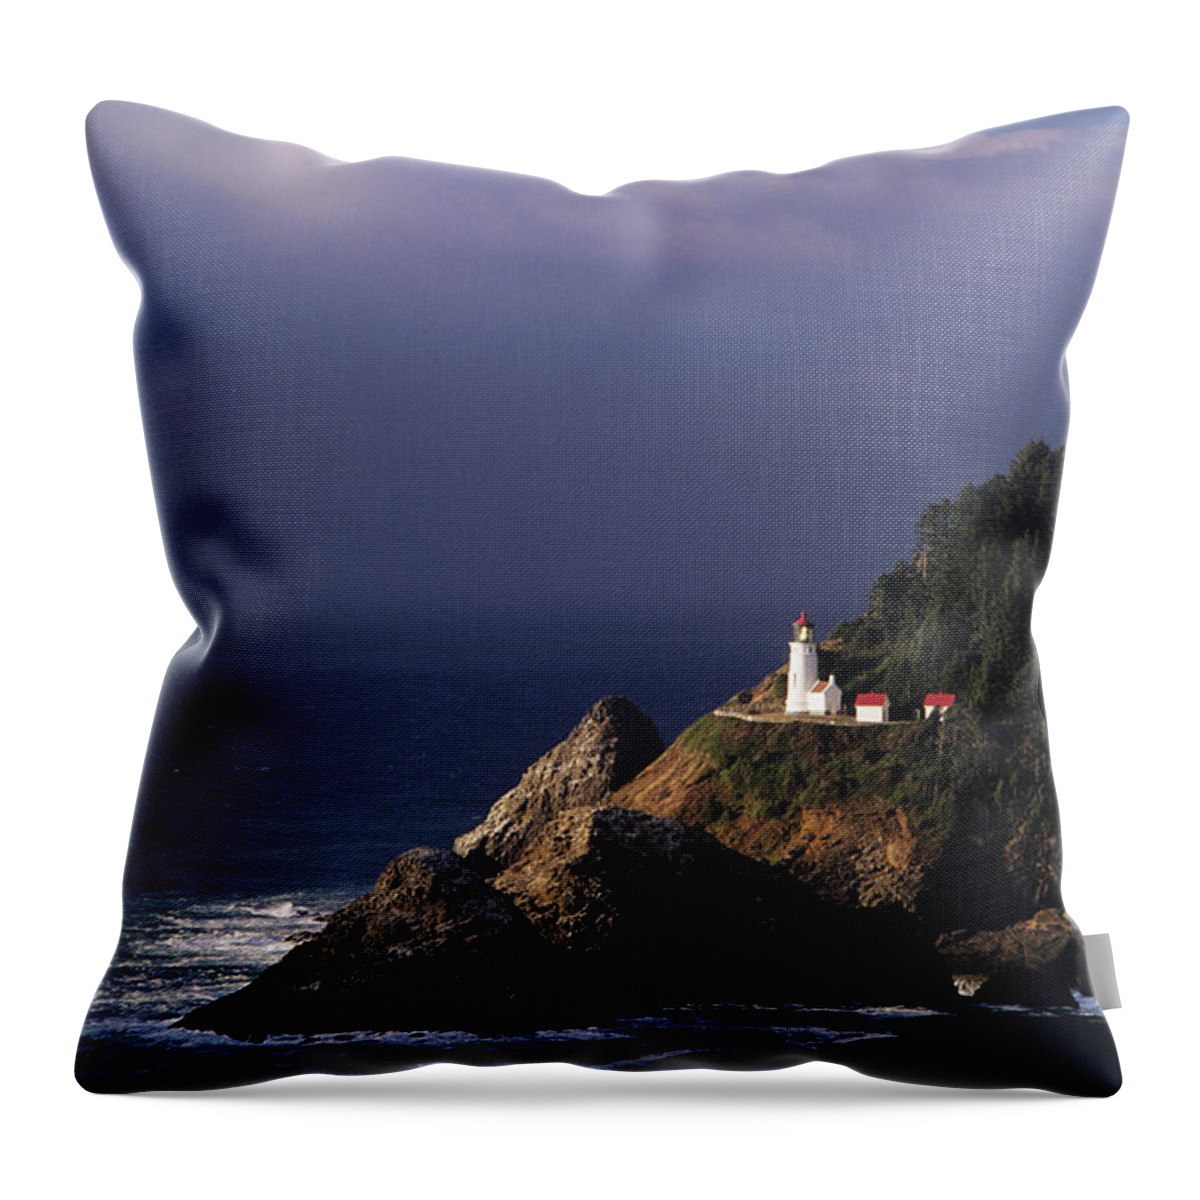 Afternoon Throw Pillow featuring the photograph Heceta Head Lighthouse by Greg Vaughn - Printscapes